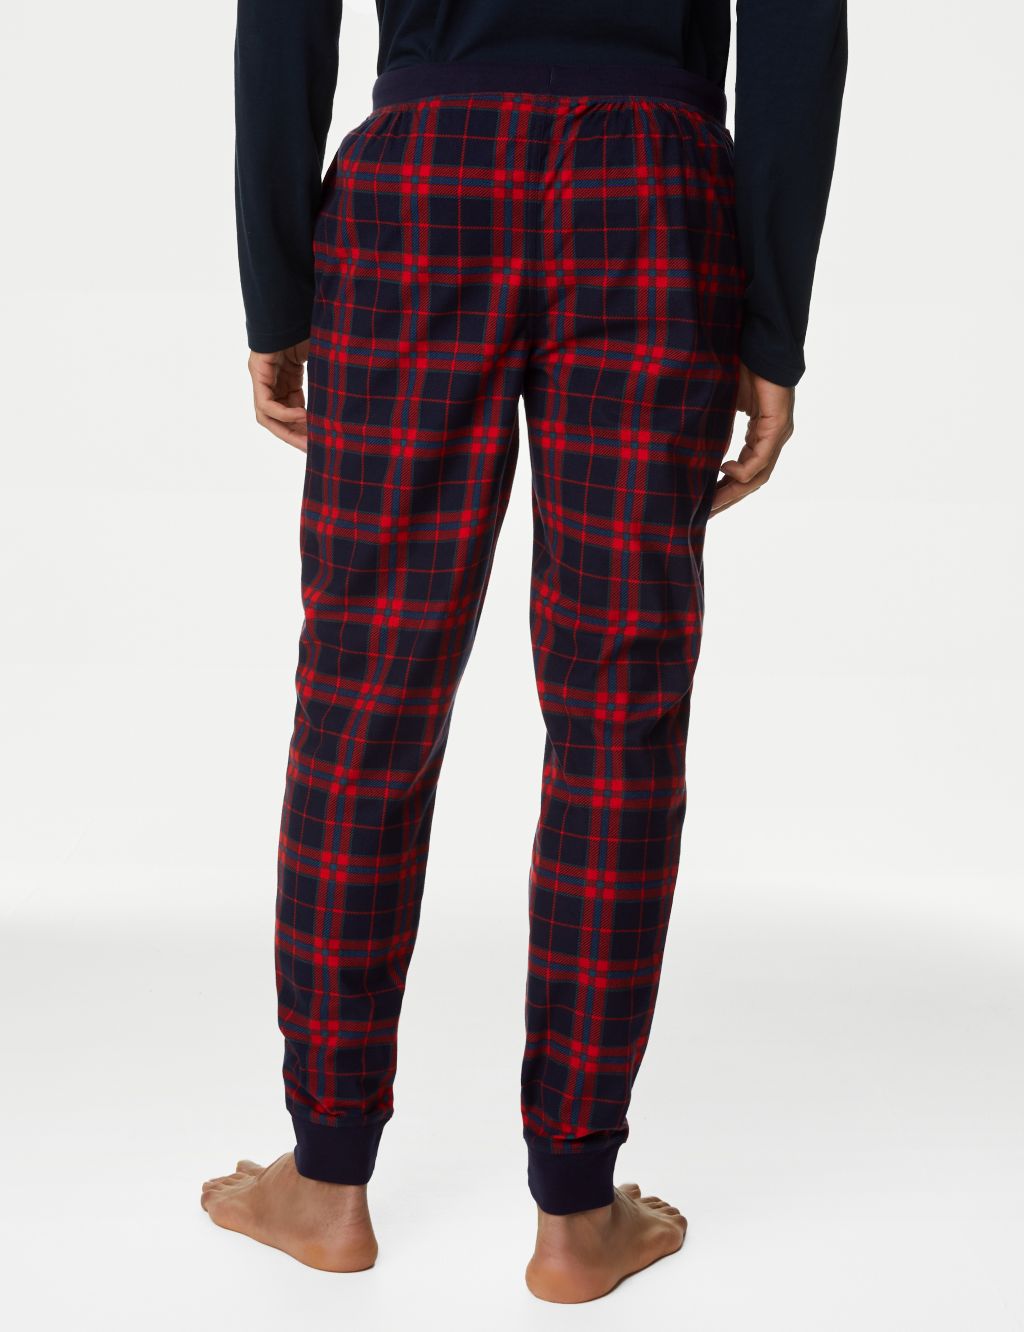 Supersoft Checked Loungewear Bottoms image 5